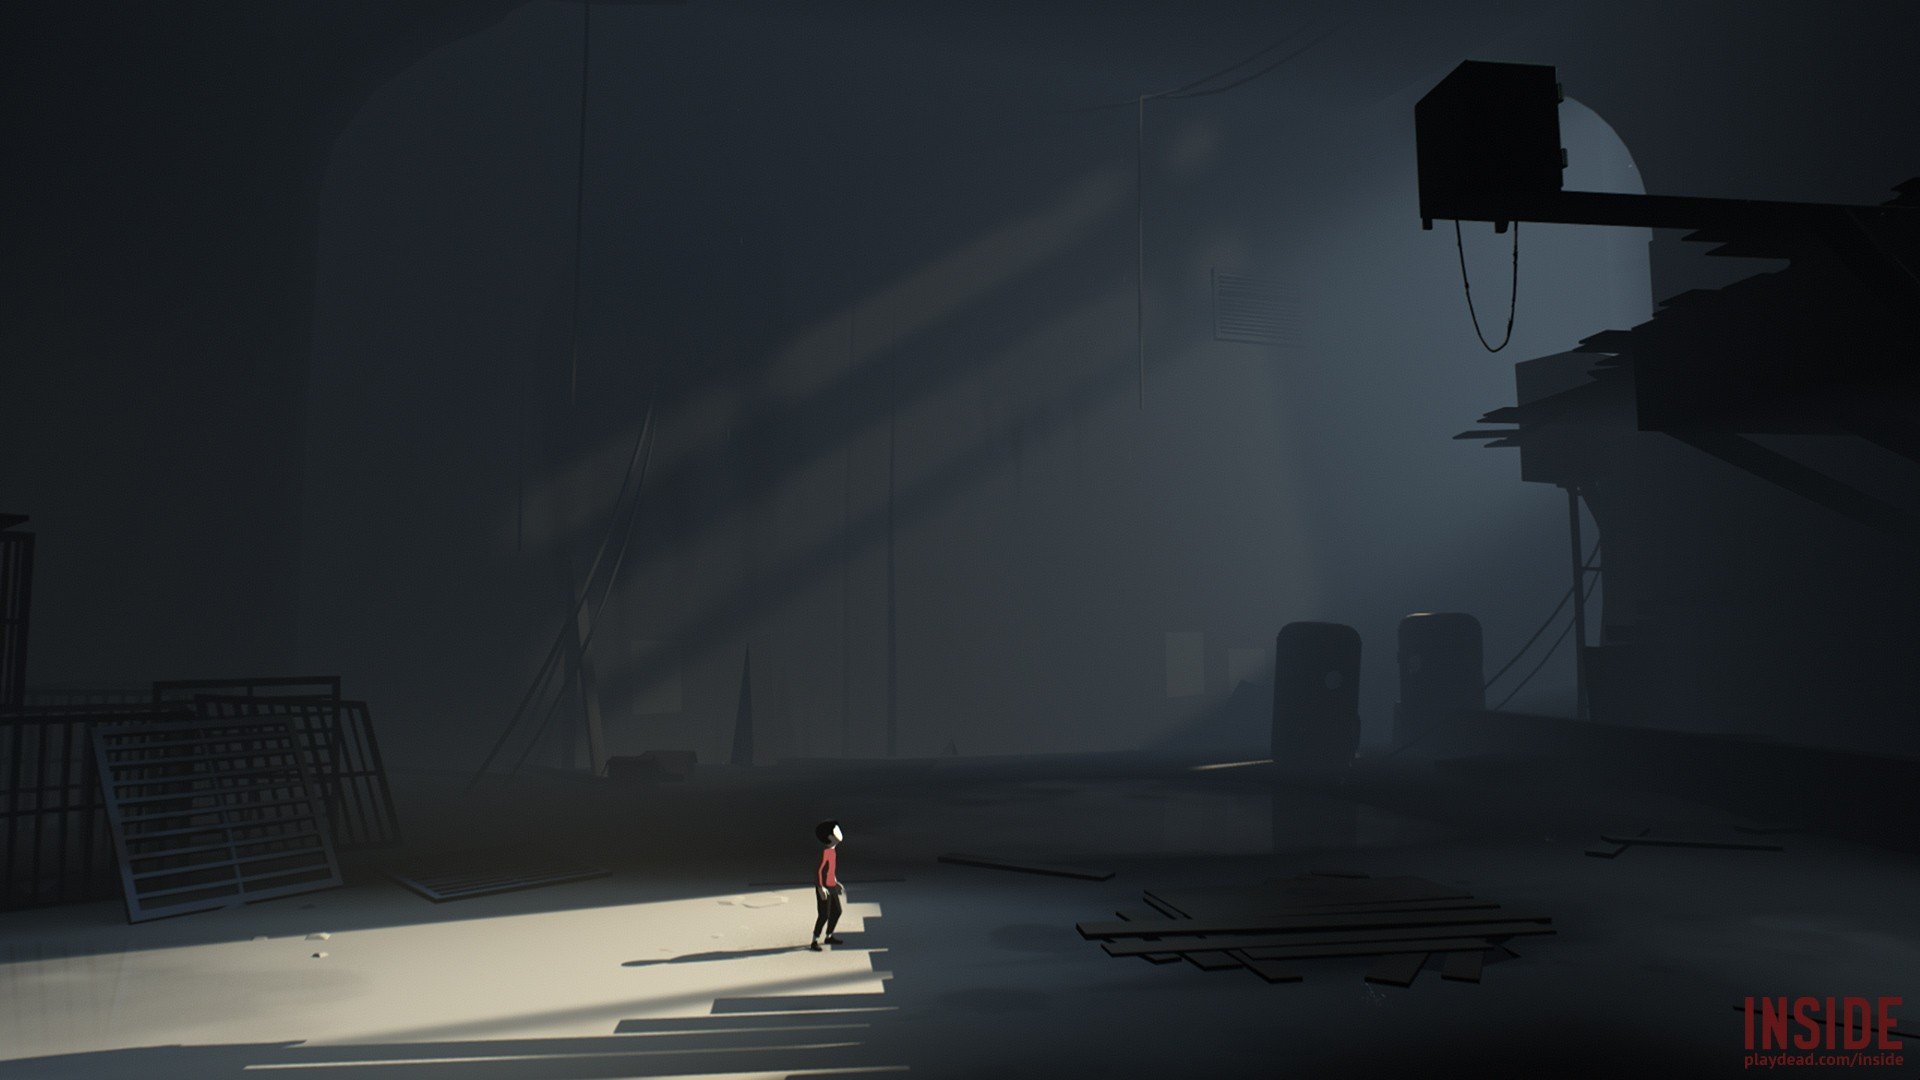 download inside playdead for free